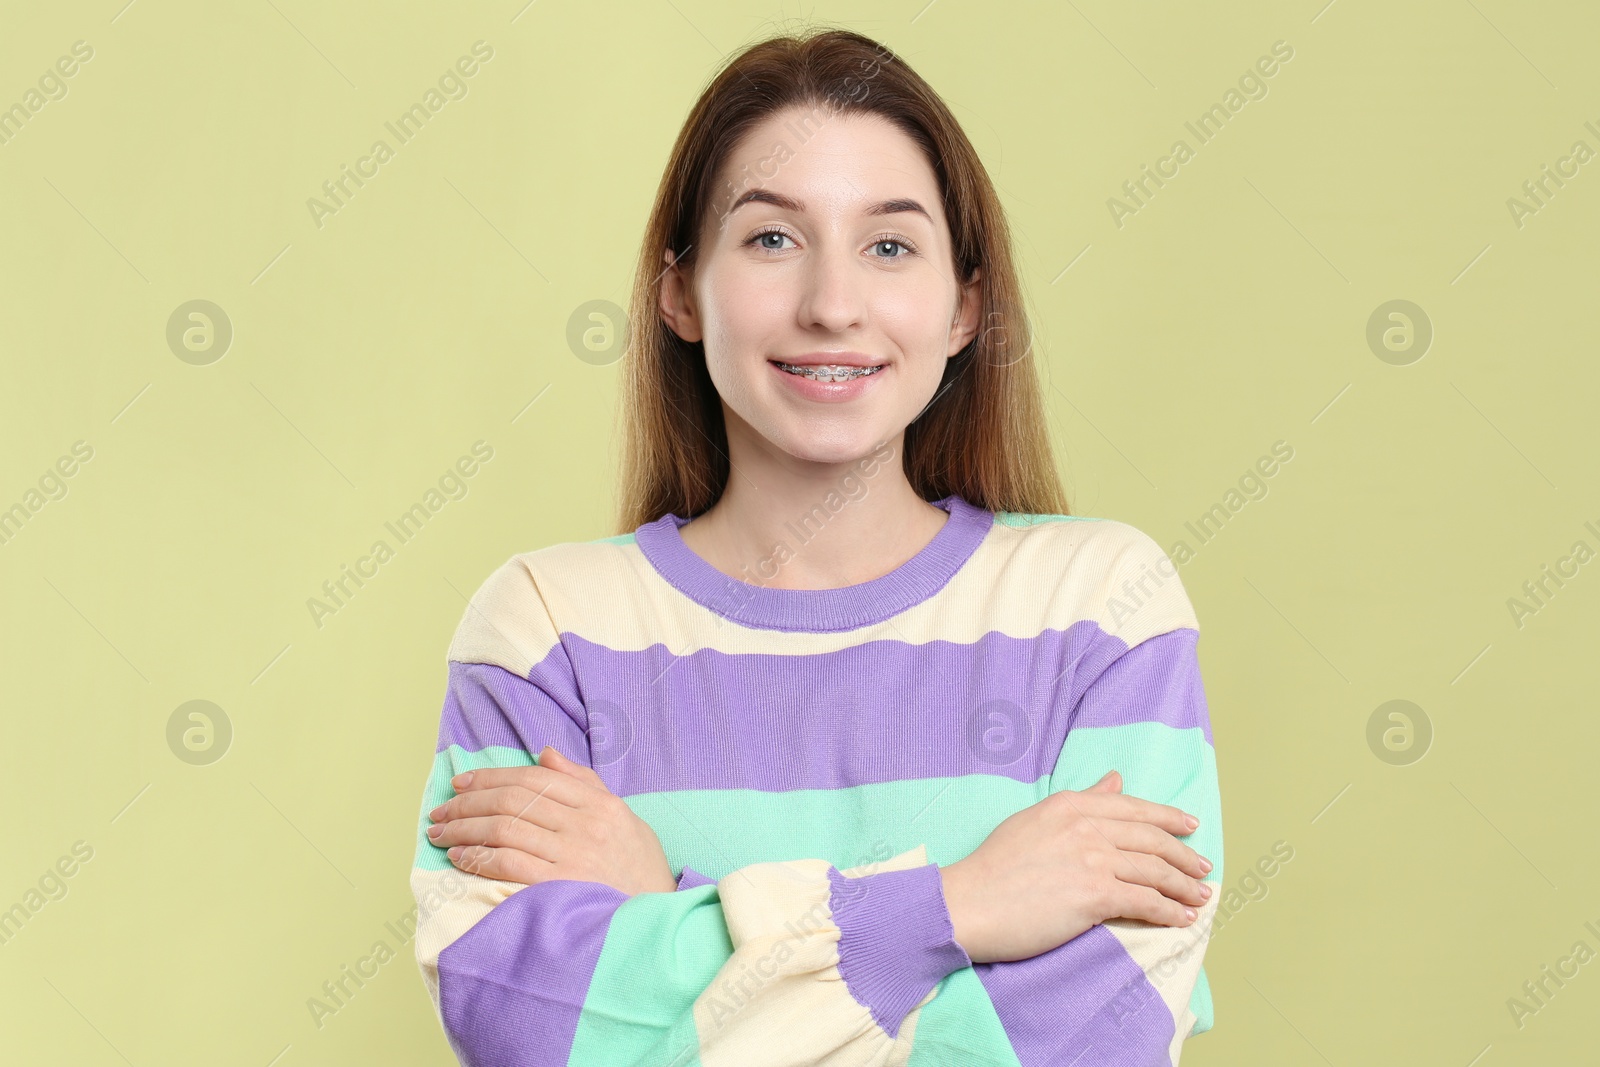 Photo of Portrait of smiling woman with dental braces on light green background